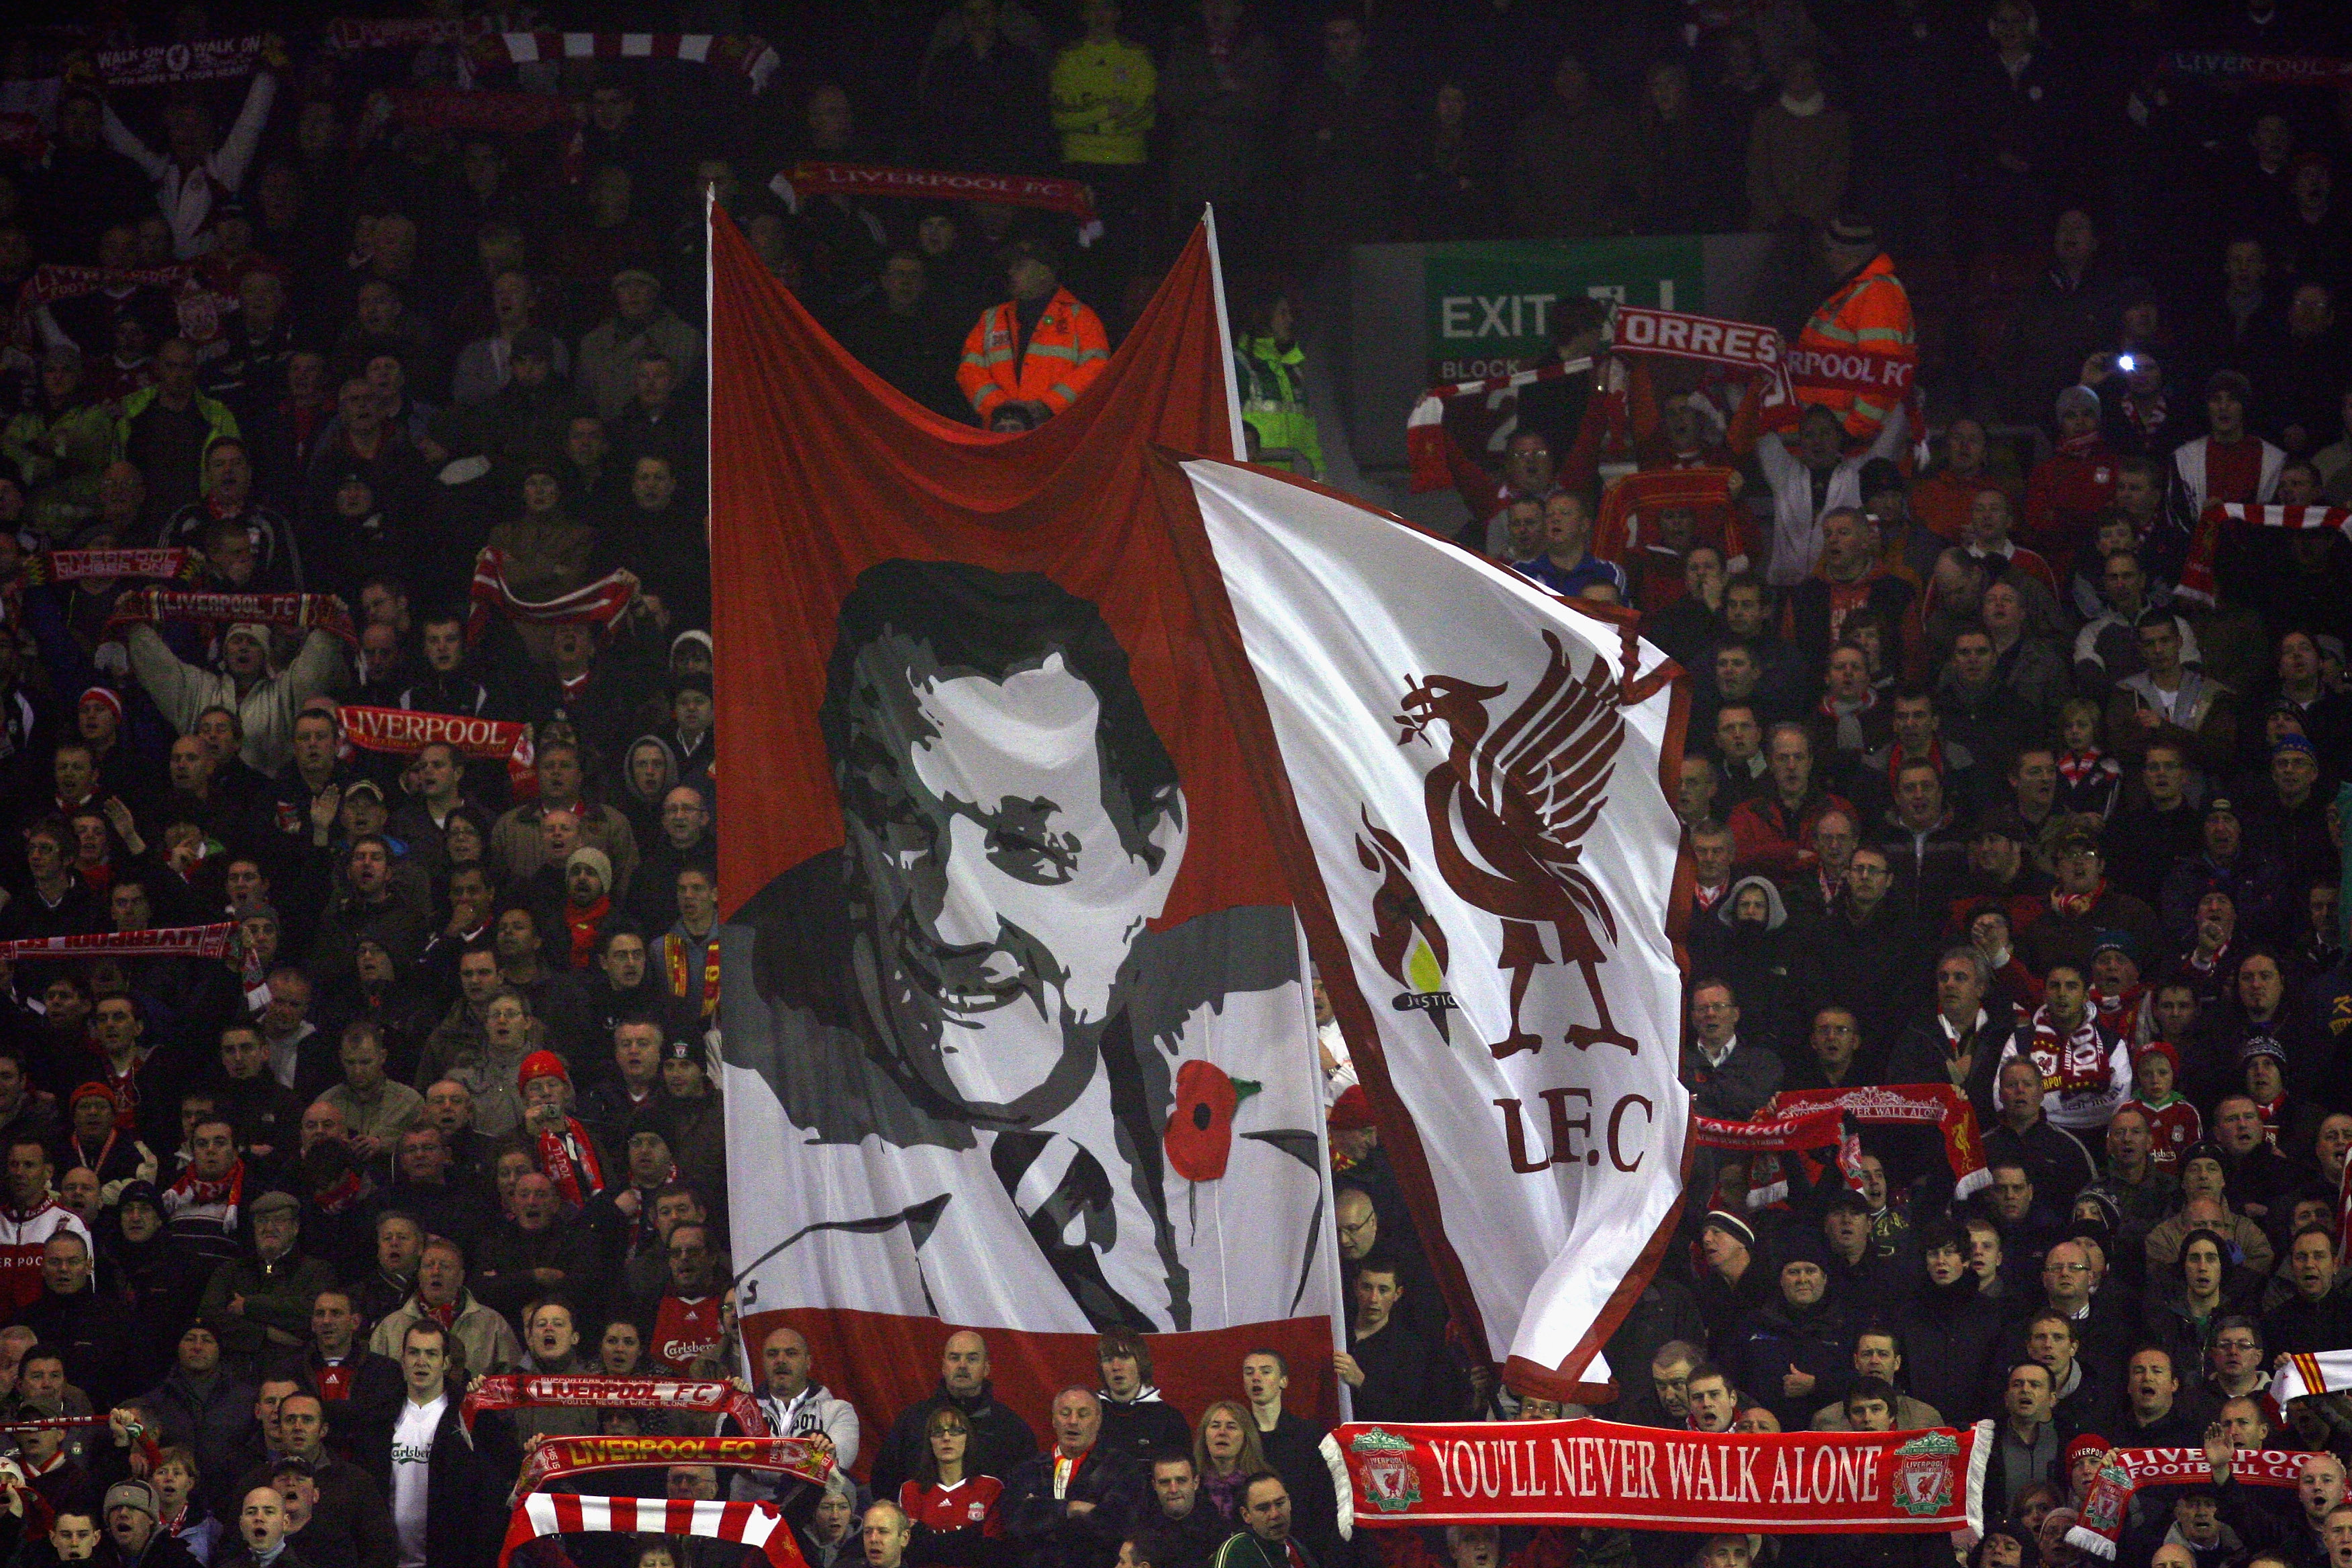 LIVERPOOL, ENGLAND - NOVEMBER 09:  Liverpool fans show off a Bob Paisley banner prior to the Barclays Premier League match between Liverpool and Birmingham City at Anfield on November 9, 2009 in Liverpool, England.  (Photo by Alex Livesey/Getty Images)